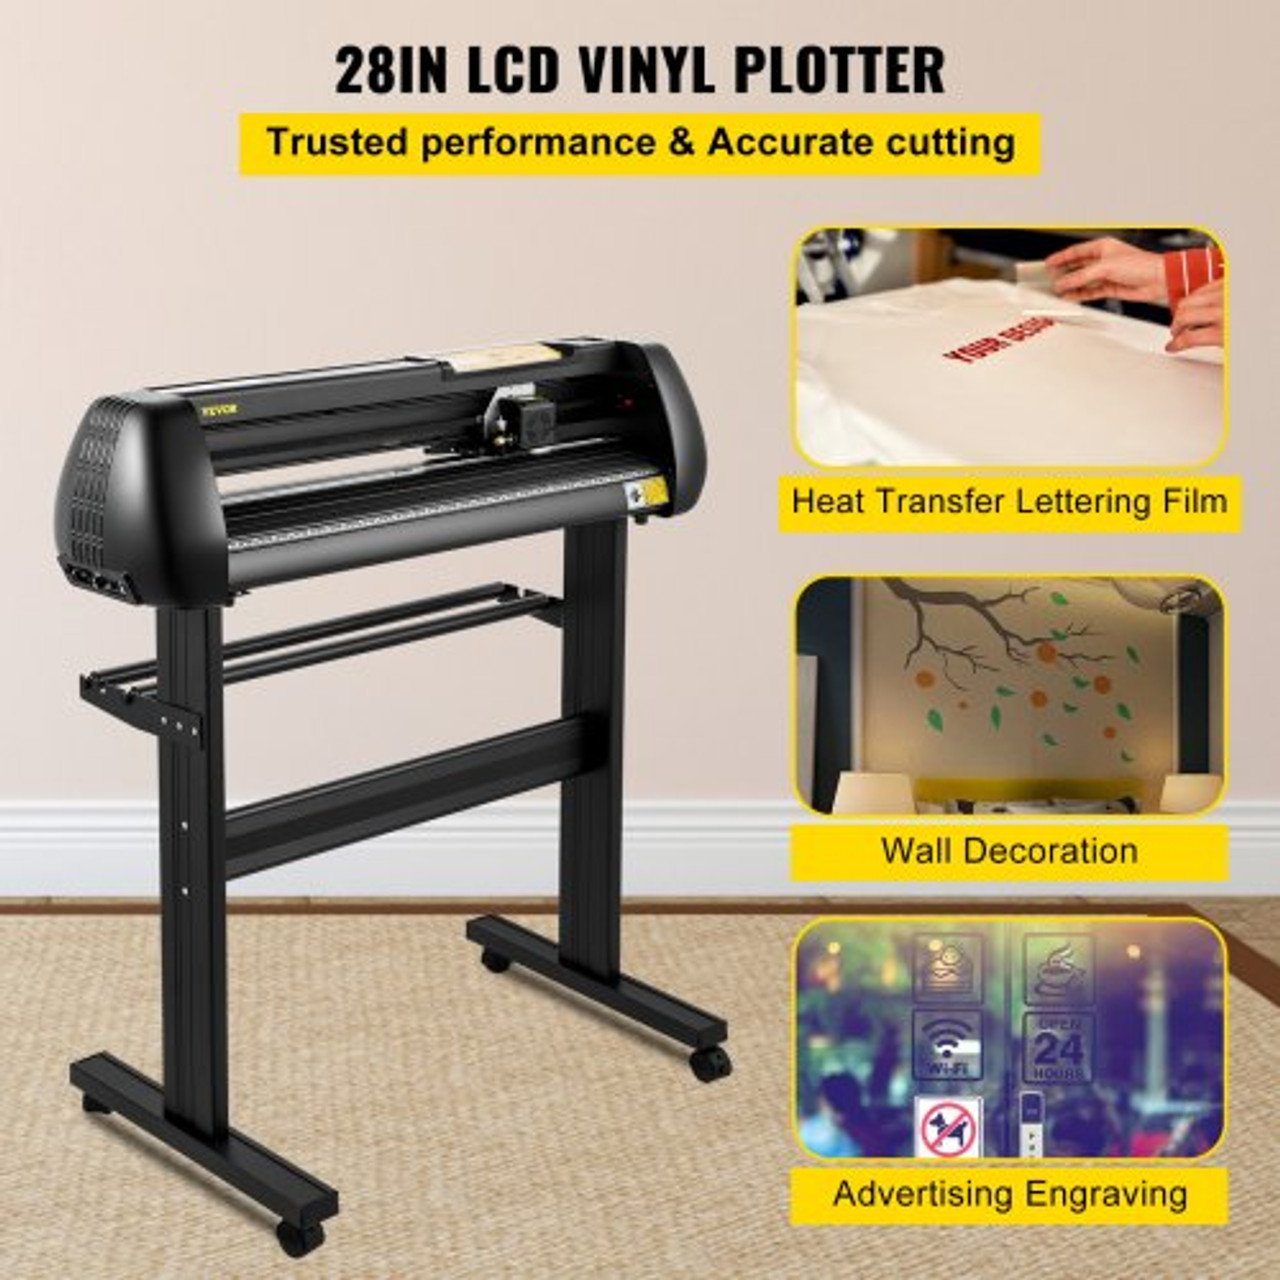 Vinyl Cutter Machine, Upgraded 28 Inch Paper Feed Cutting Plotter Bundle, Adjustable Force & Speed Vinyl Printer with Powerful Stepper Motors, Signmaster Software Compatible with Windows System